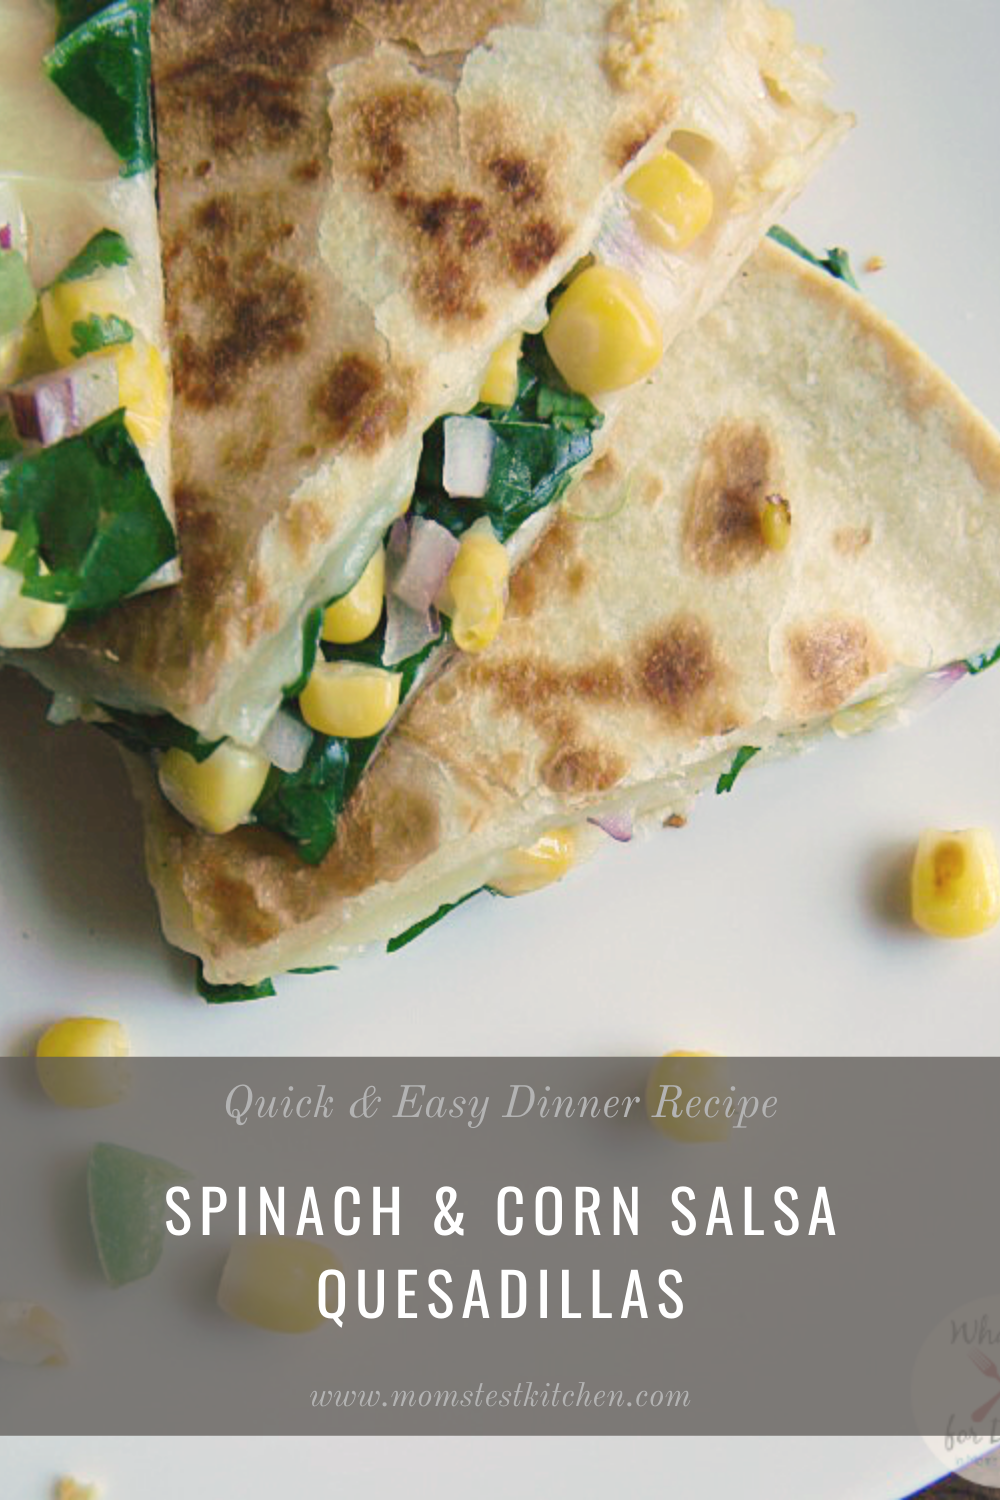 These Veggie Quesadillas loaded with Spinach and a Copycat Chipotle Corn Salsa are the perfect quick and easy dinner the whole family will love.